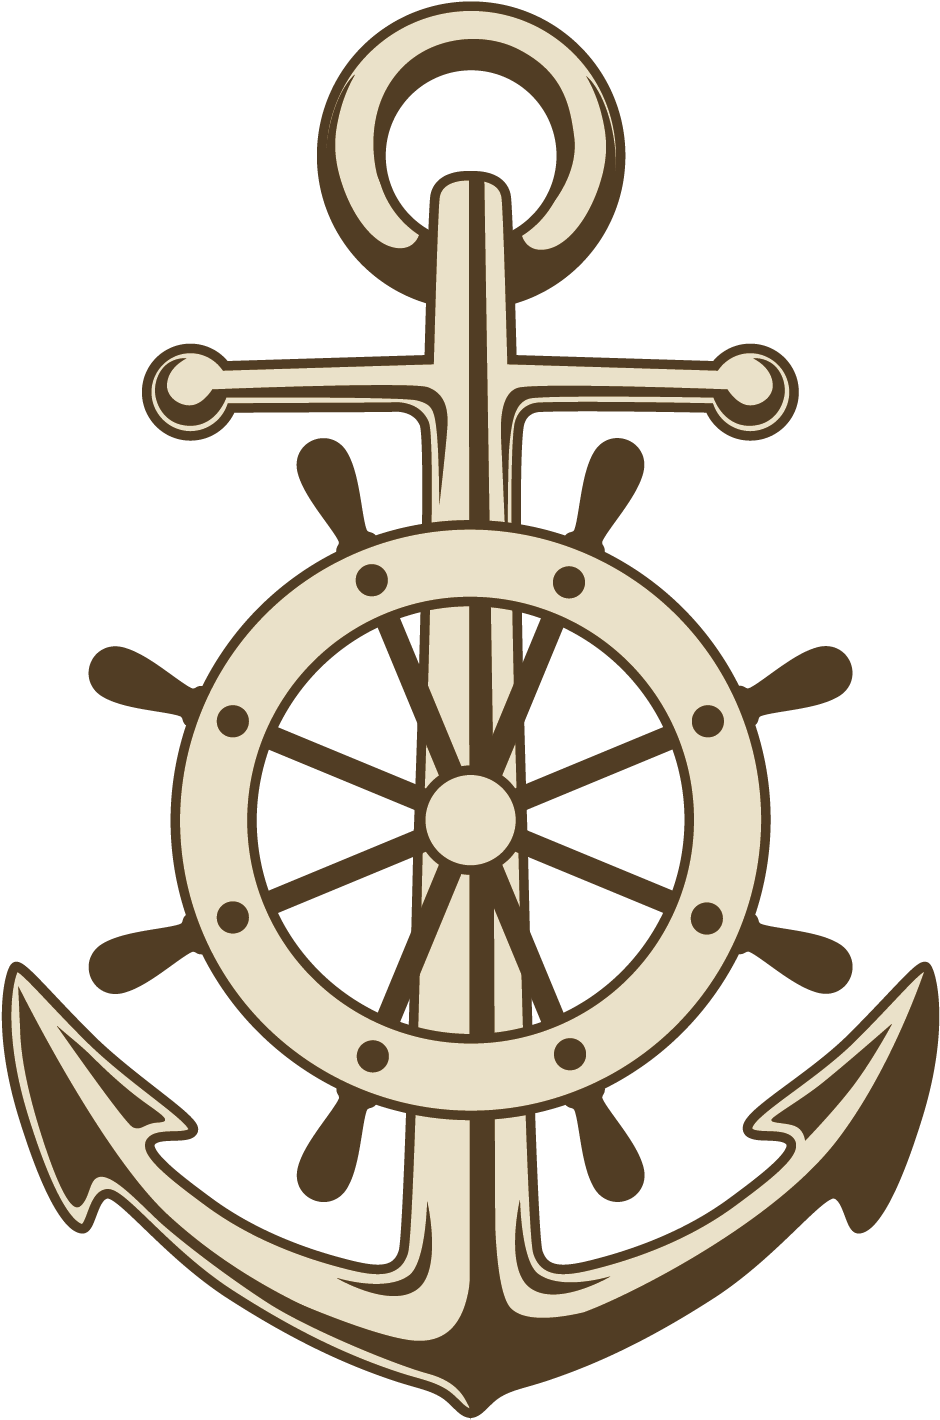 Download PNG image - Anchor PNG Image 